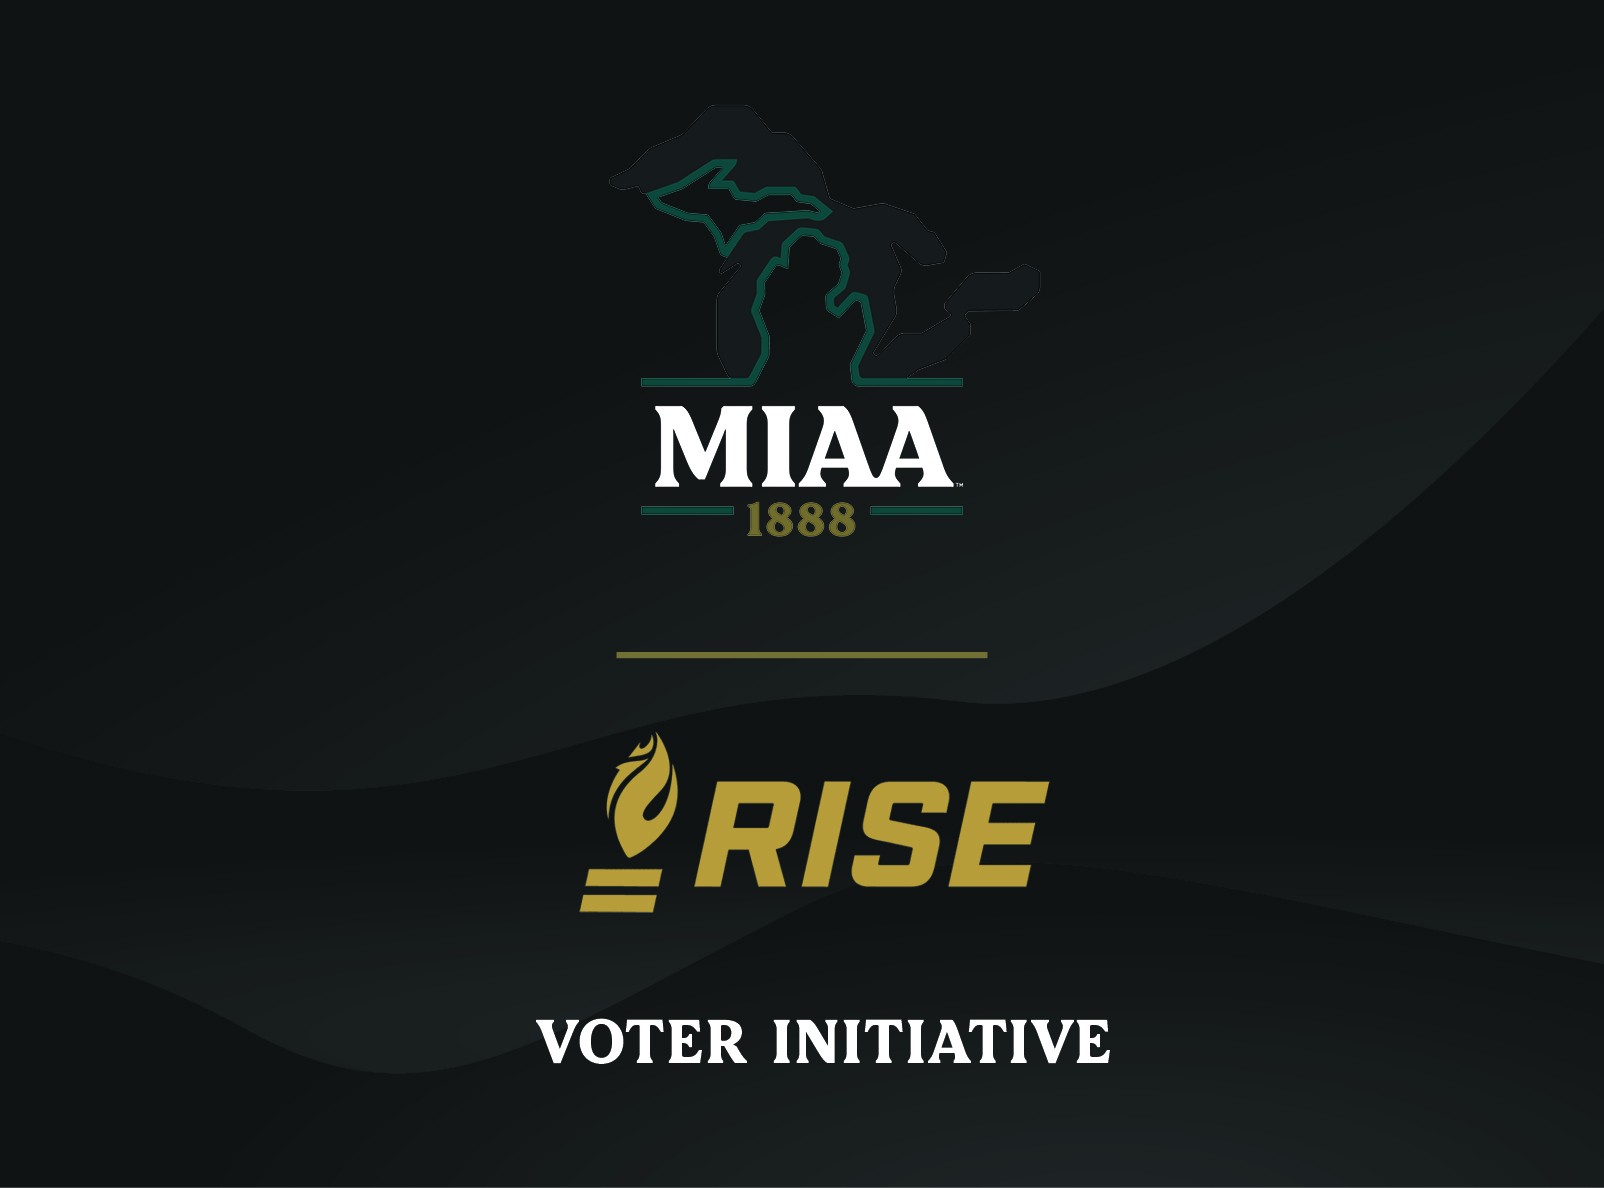 MIAA Partners with RISE on Voter Engagement